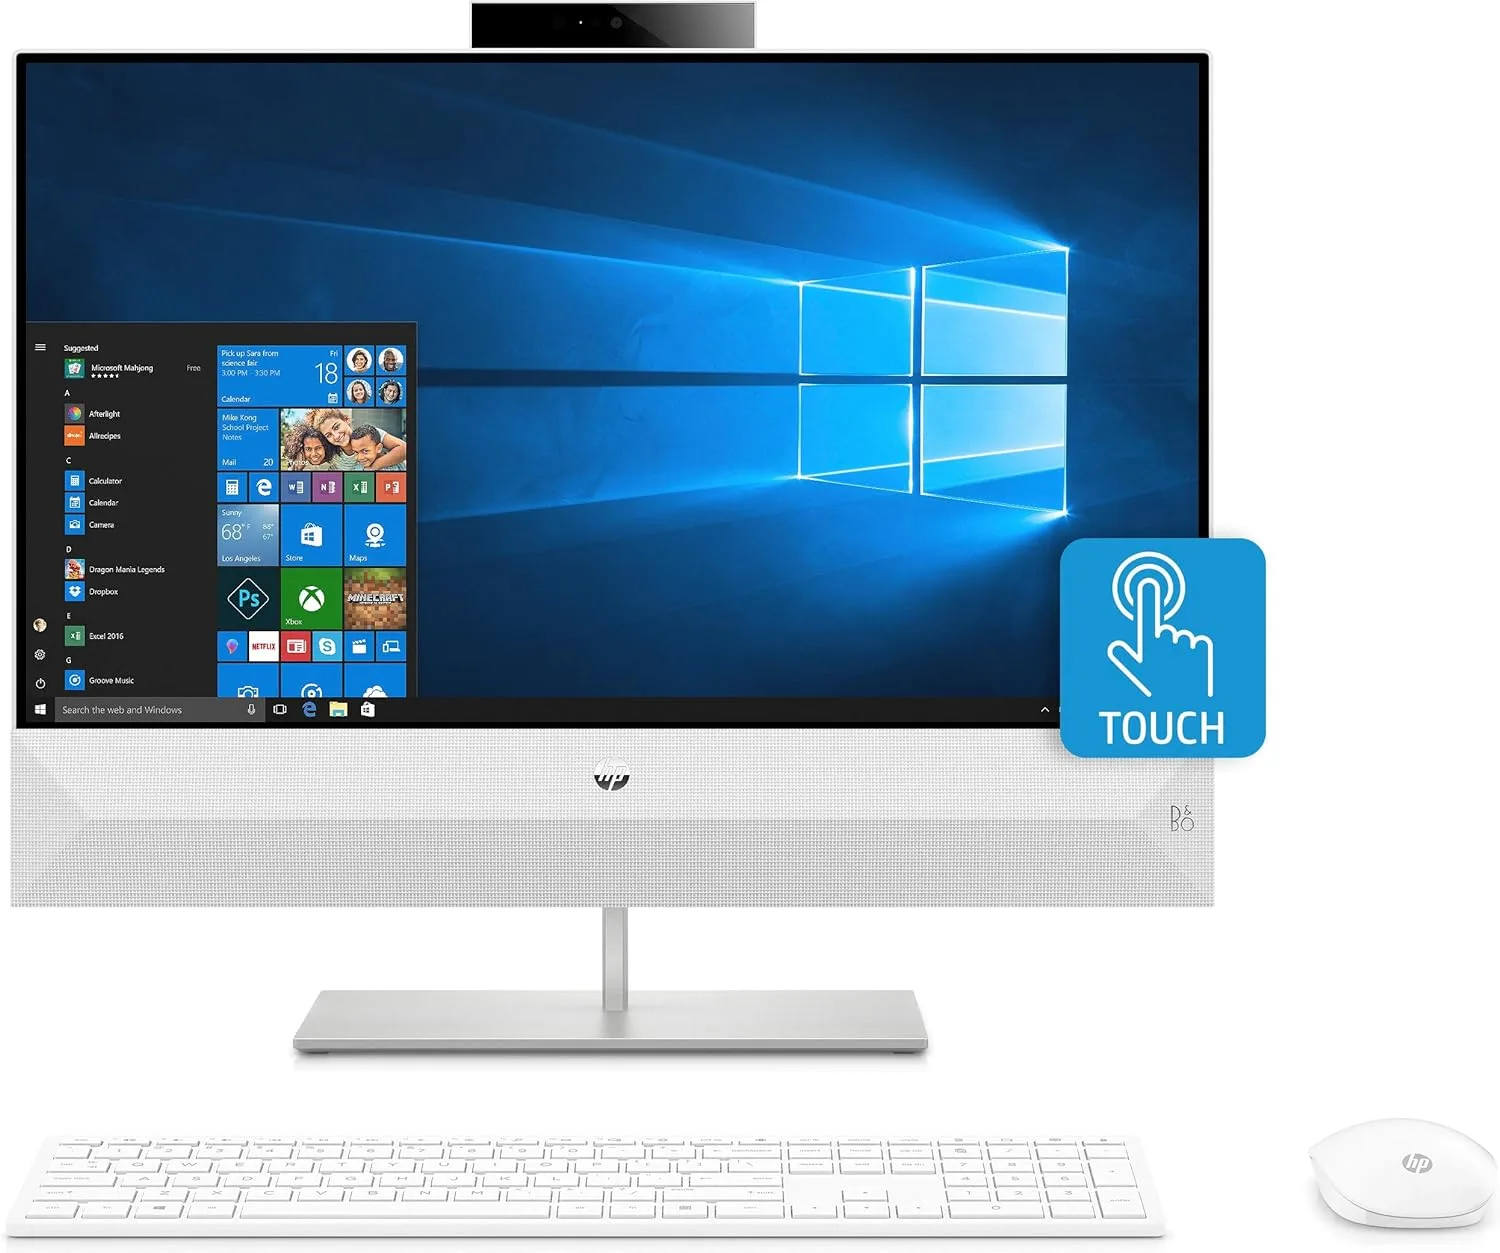 HP Pavillion All in one 24 - Best All in one Desktop PC under 1 lakh 